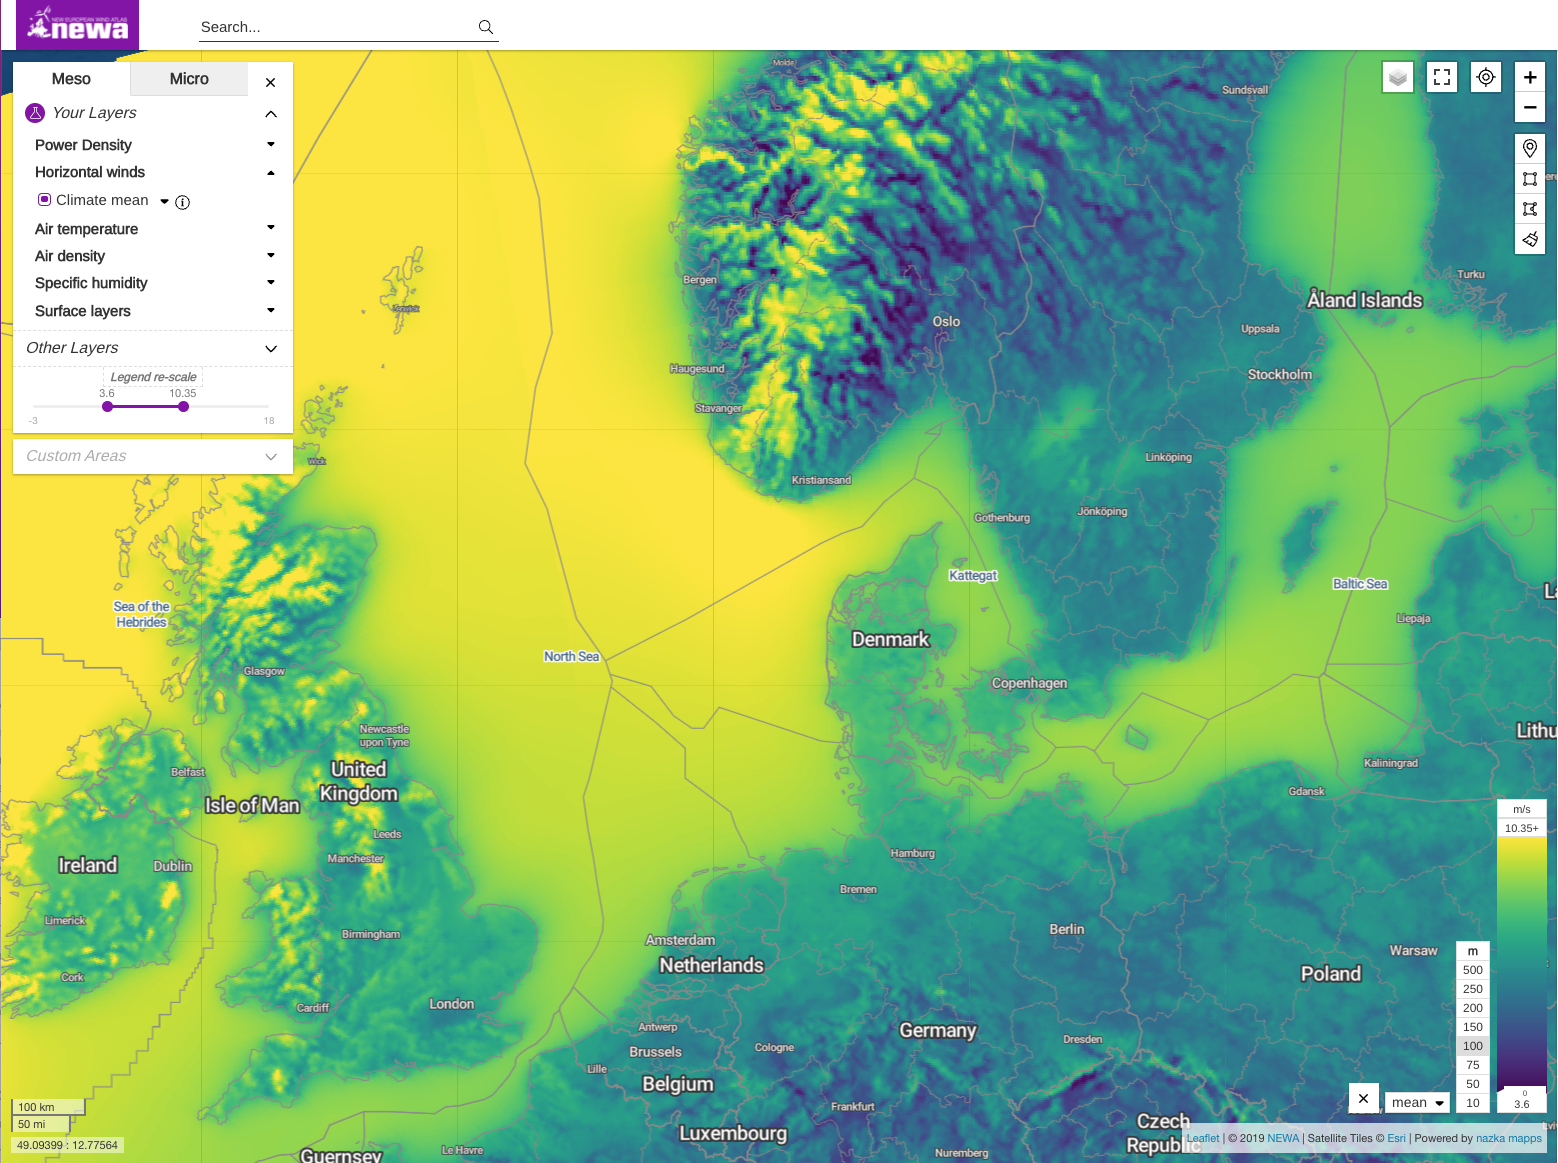 Map of mean wind speed at 100 m above ground level for Northern Europe as displayed by the NEWA website https://map.neweuropeanwindatlas.eu/. PRACE resources were used for the calculations.